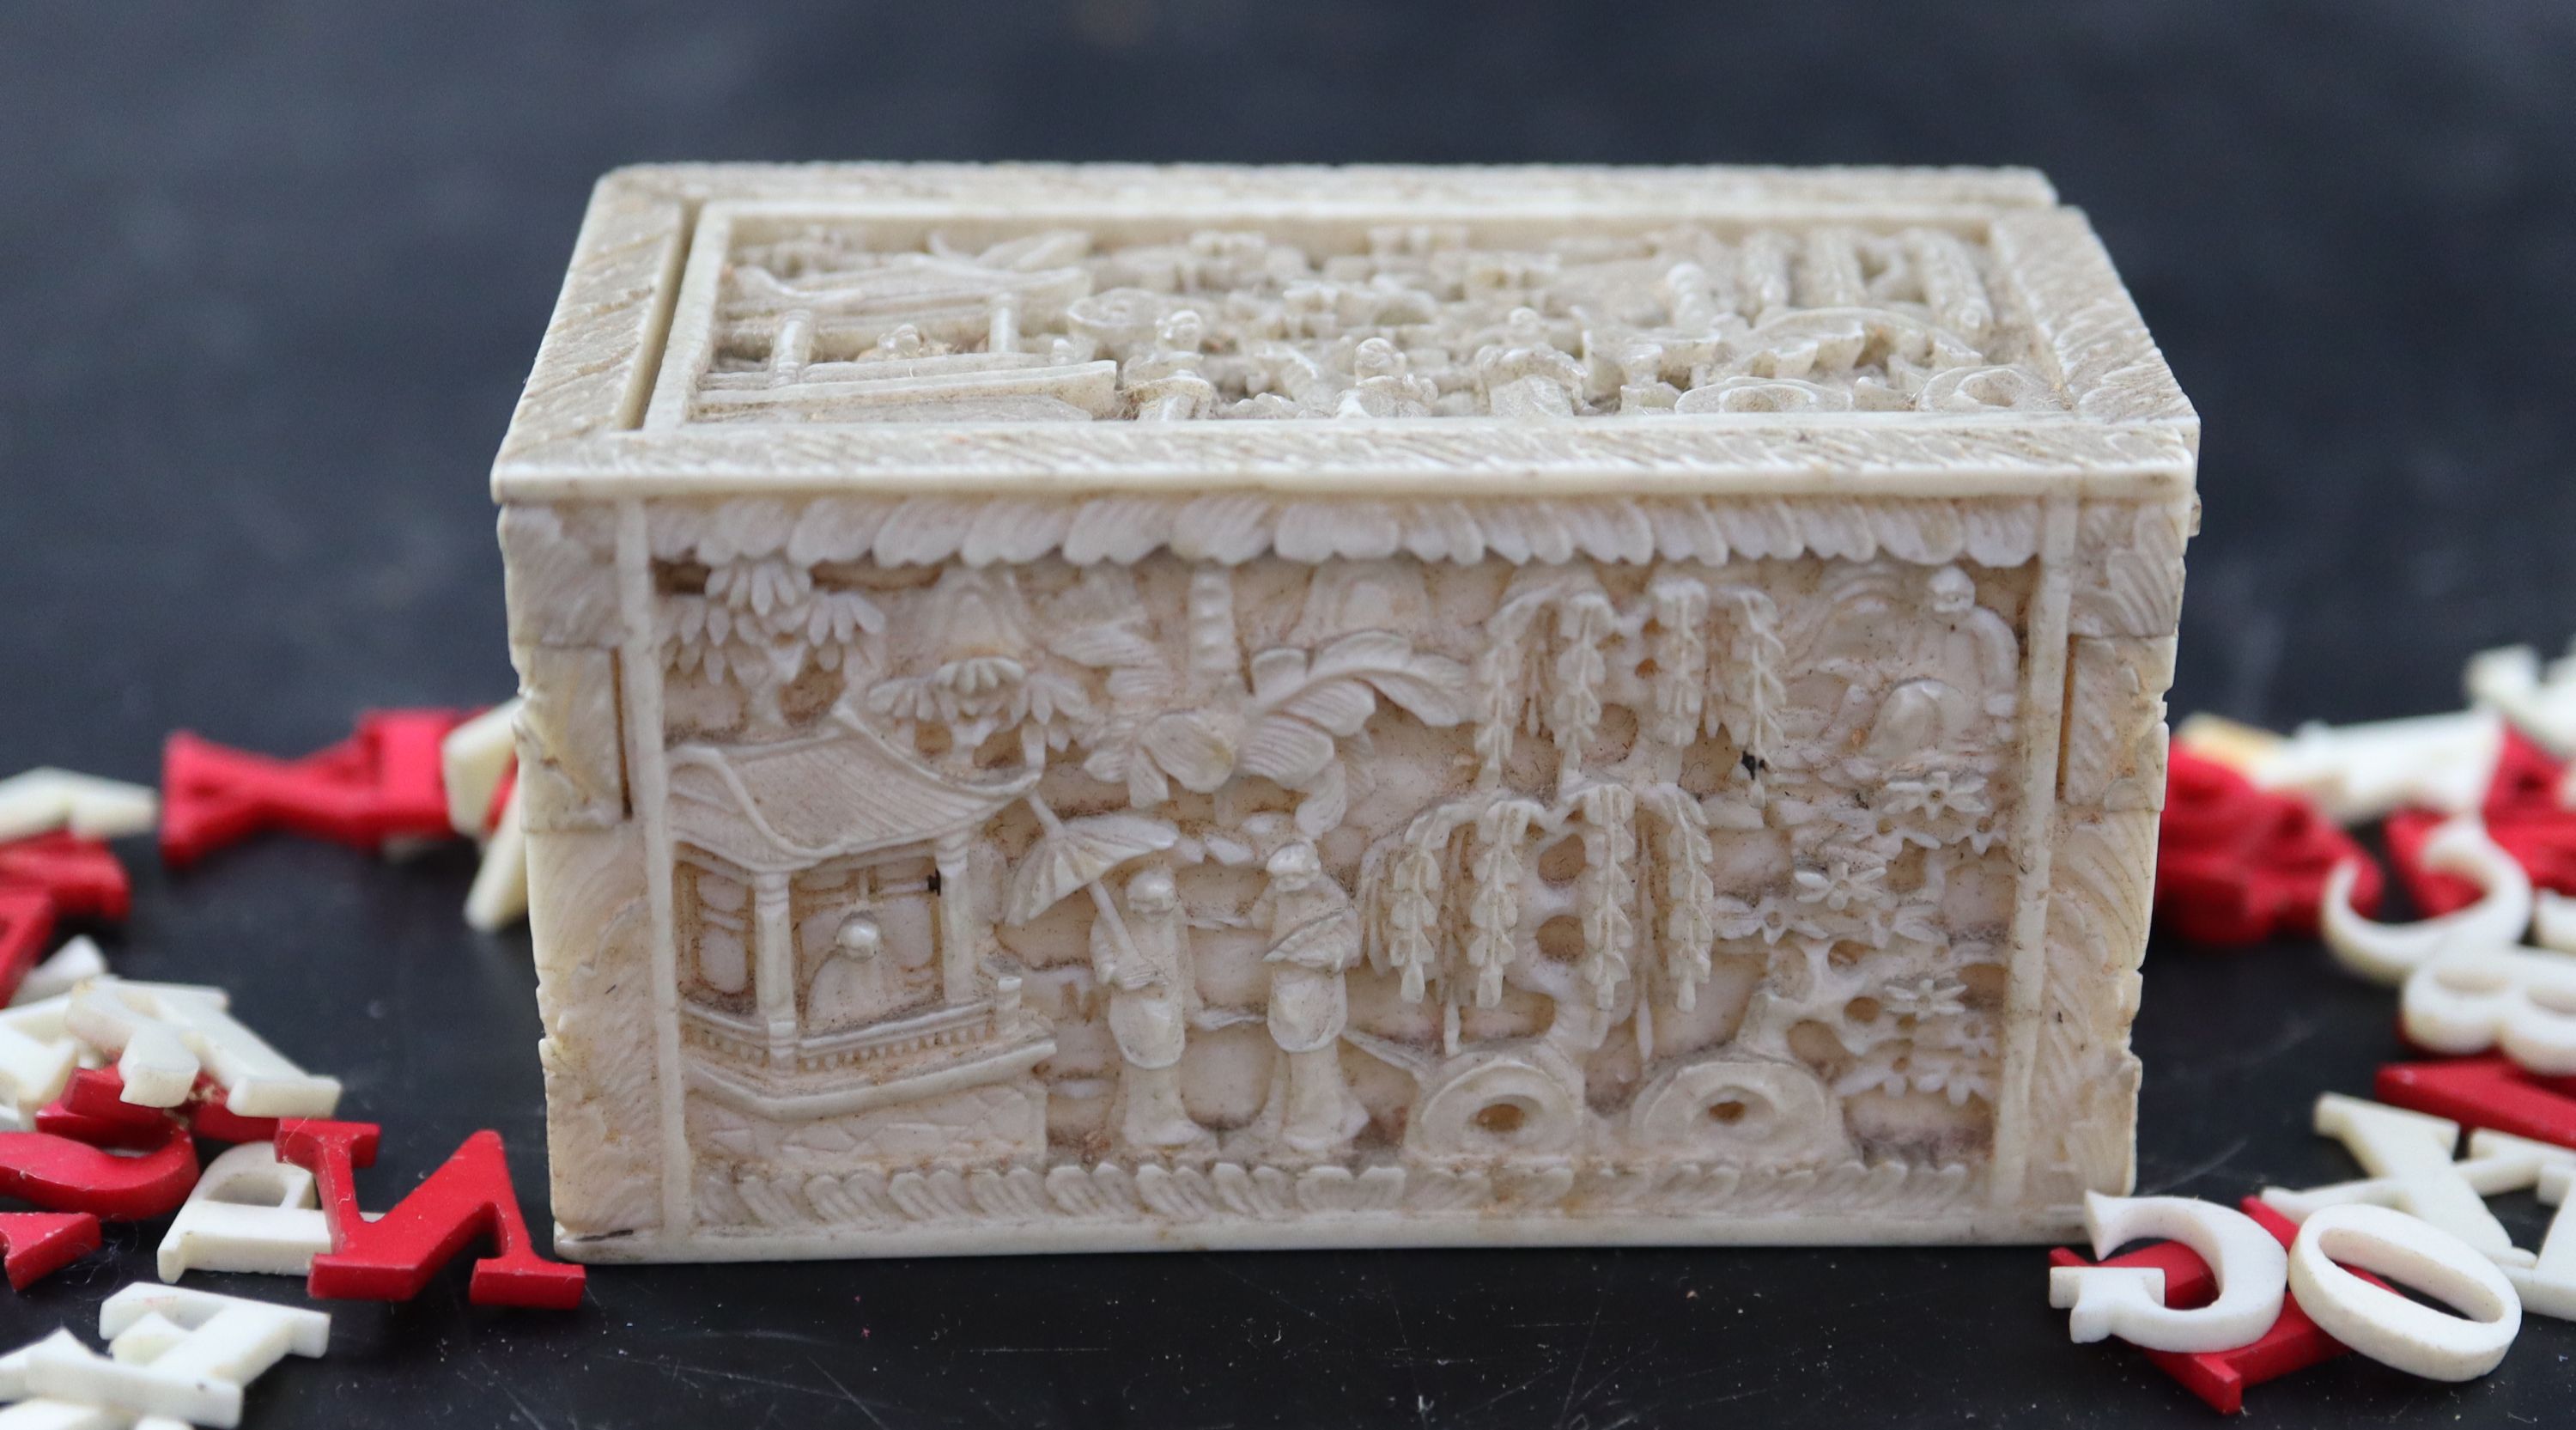 A 19th century Chinese relief carved ivory box housing plain and red stained ivory alphabet letters, 6.75cm